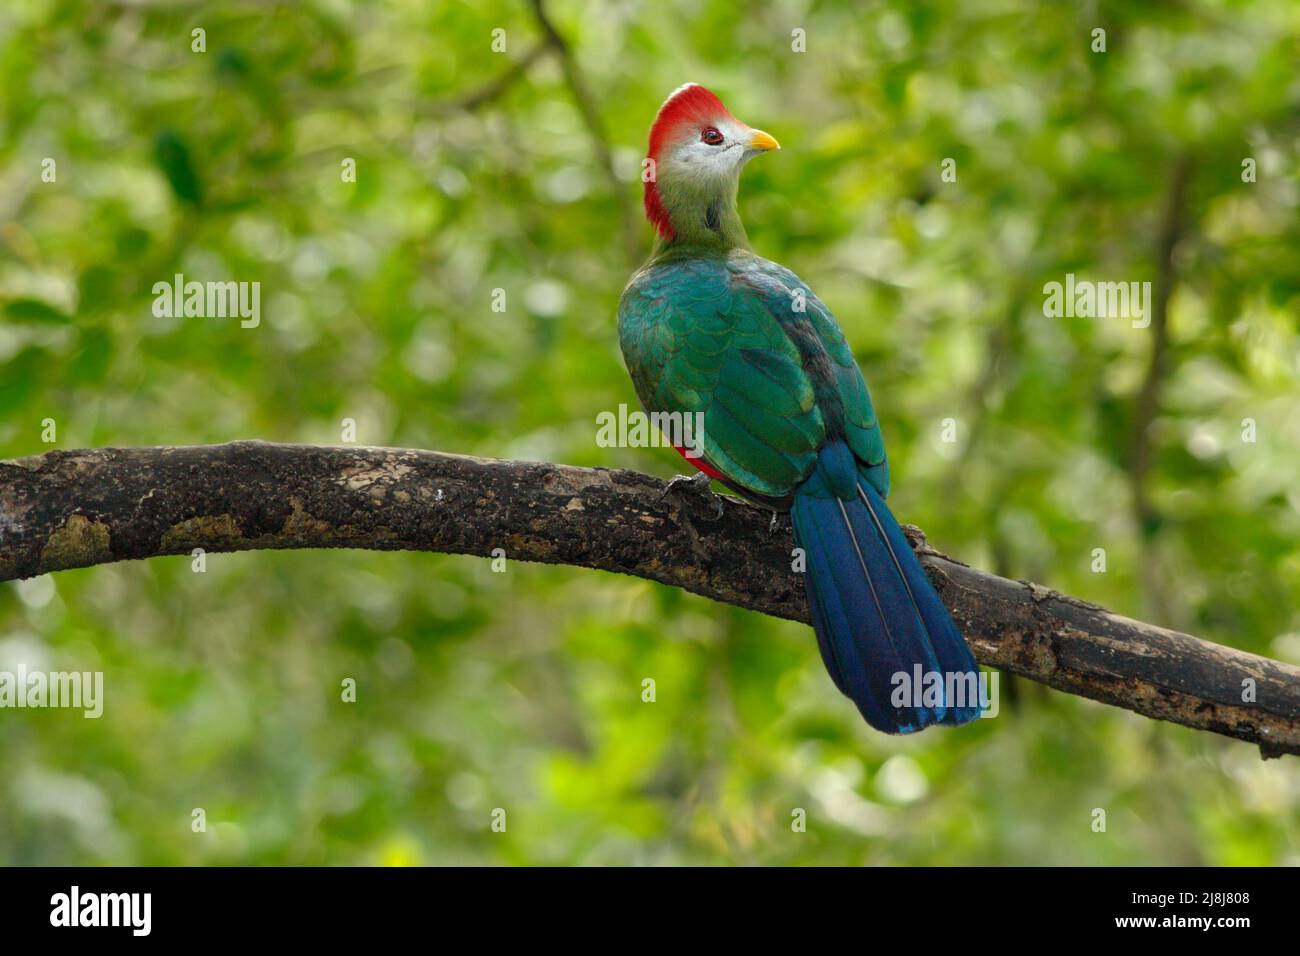 Red-Crested Turaco, Tauraco erythrolophus, rare coloured green bird with red head, in nature habitat. Turaco sitting on the branch, Angola, Africa. Bi Stock Photo